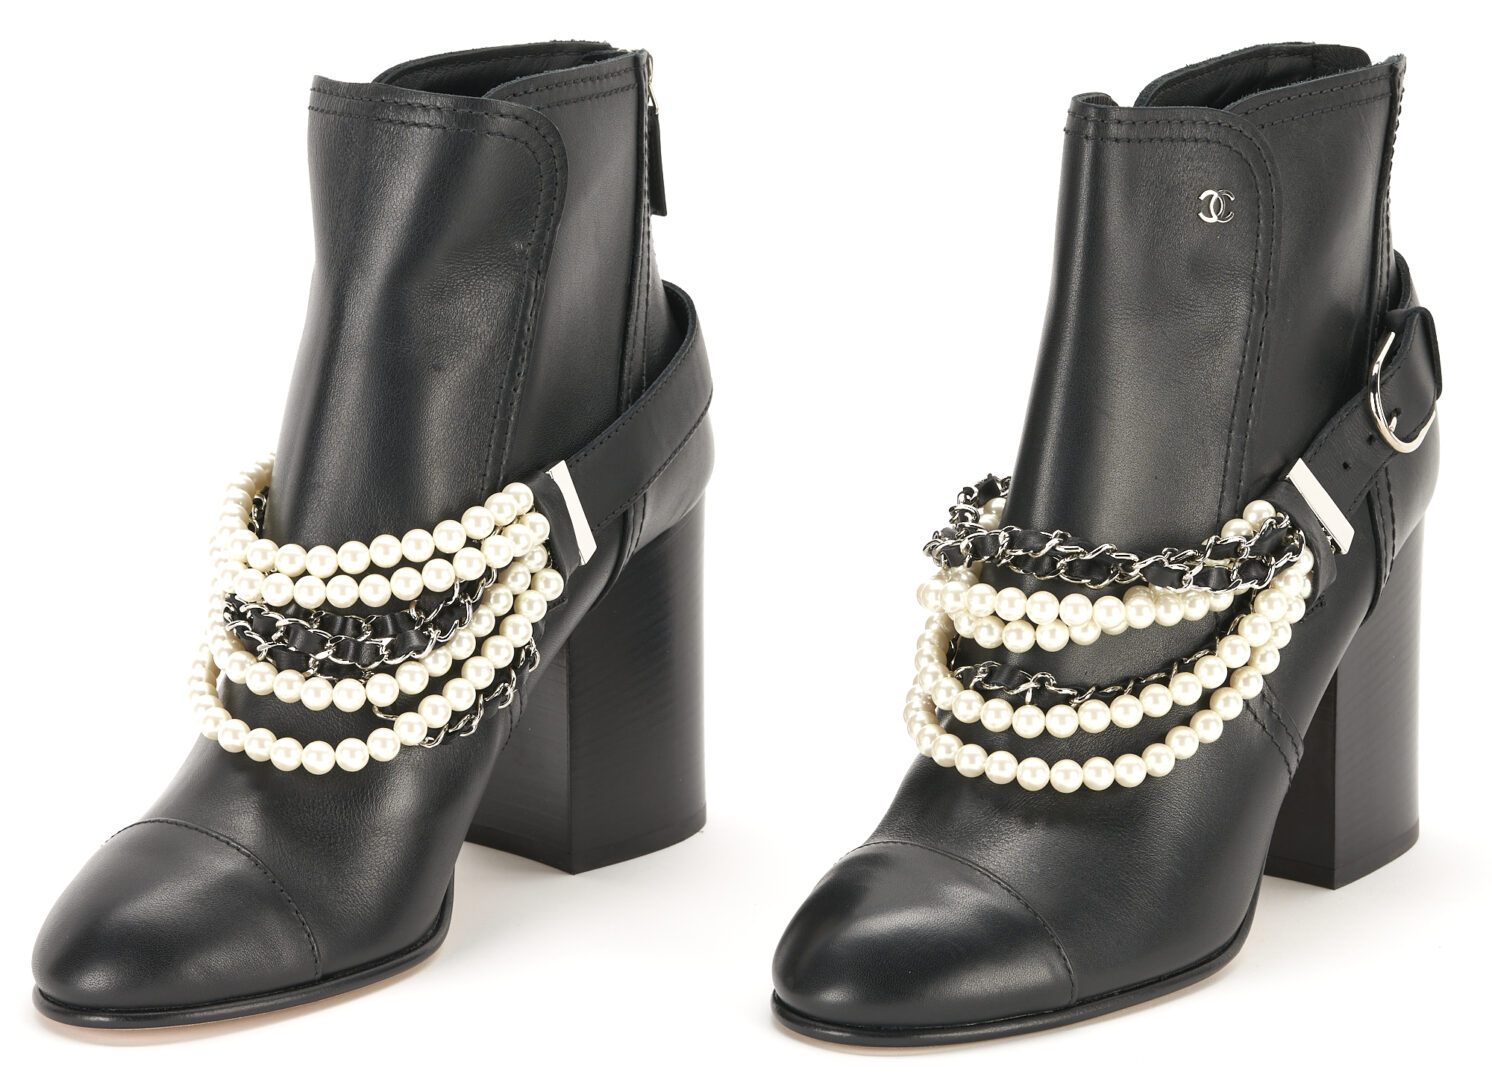 Lot 1237: Chanel Calfskin Pearl Cap Toe Ankle Boots